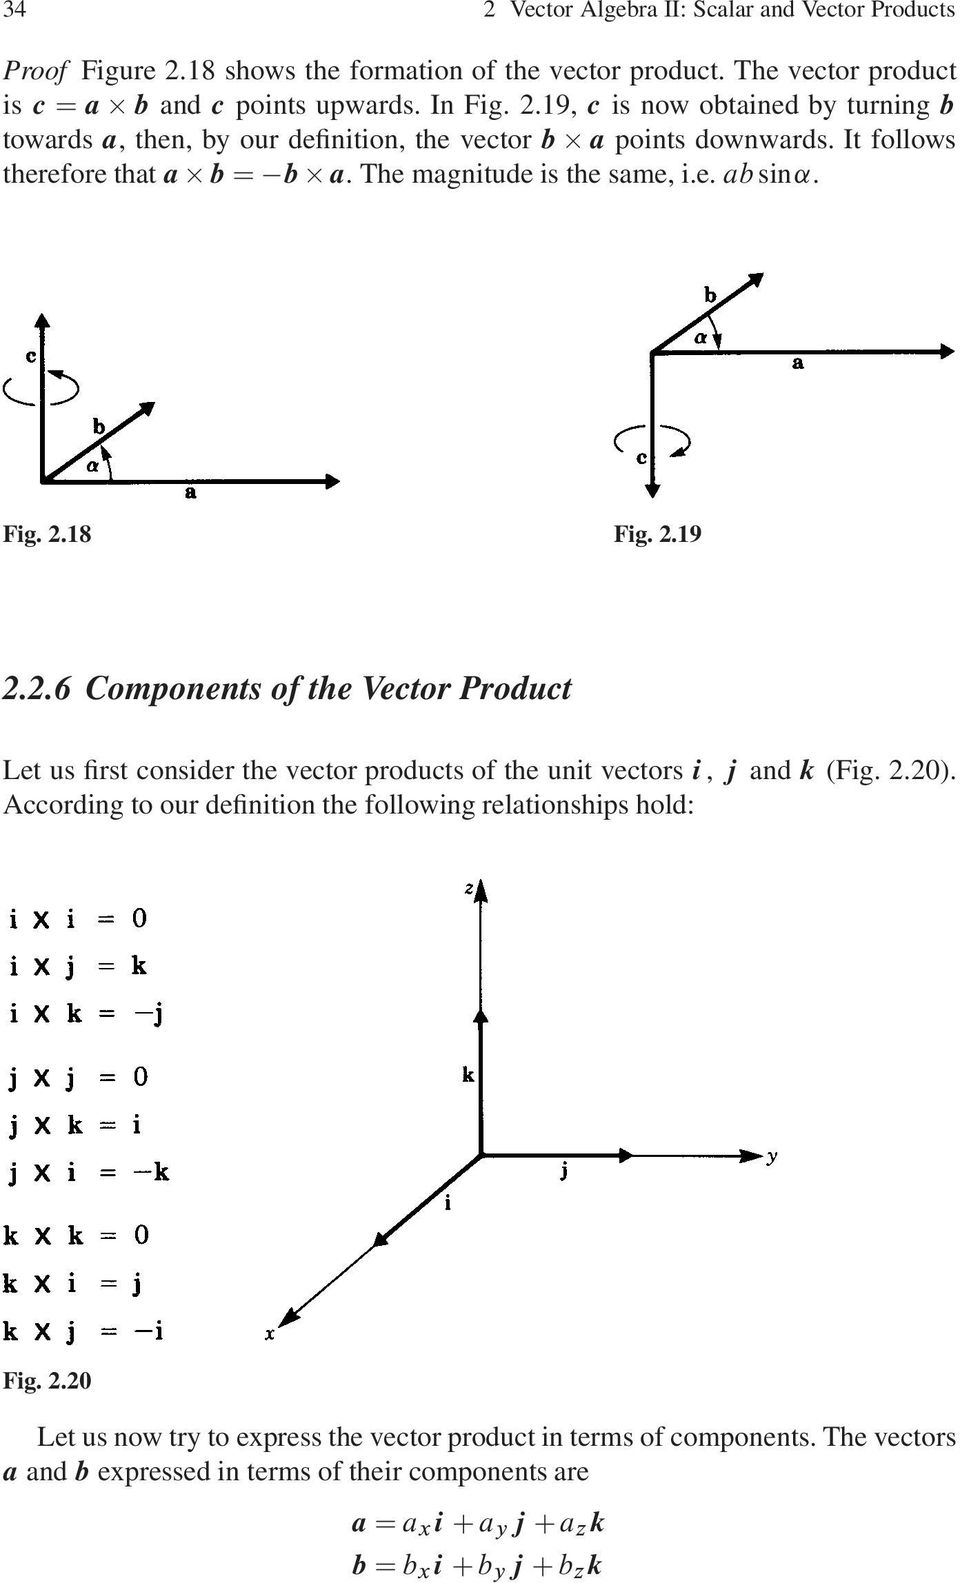 18 Fig. 2.19 2.2.6 Components of the Vector Product Let us first consider the vector products of the unit vectors i, j and k (Fig. 2.20).